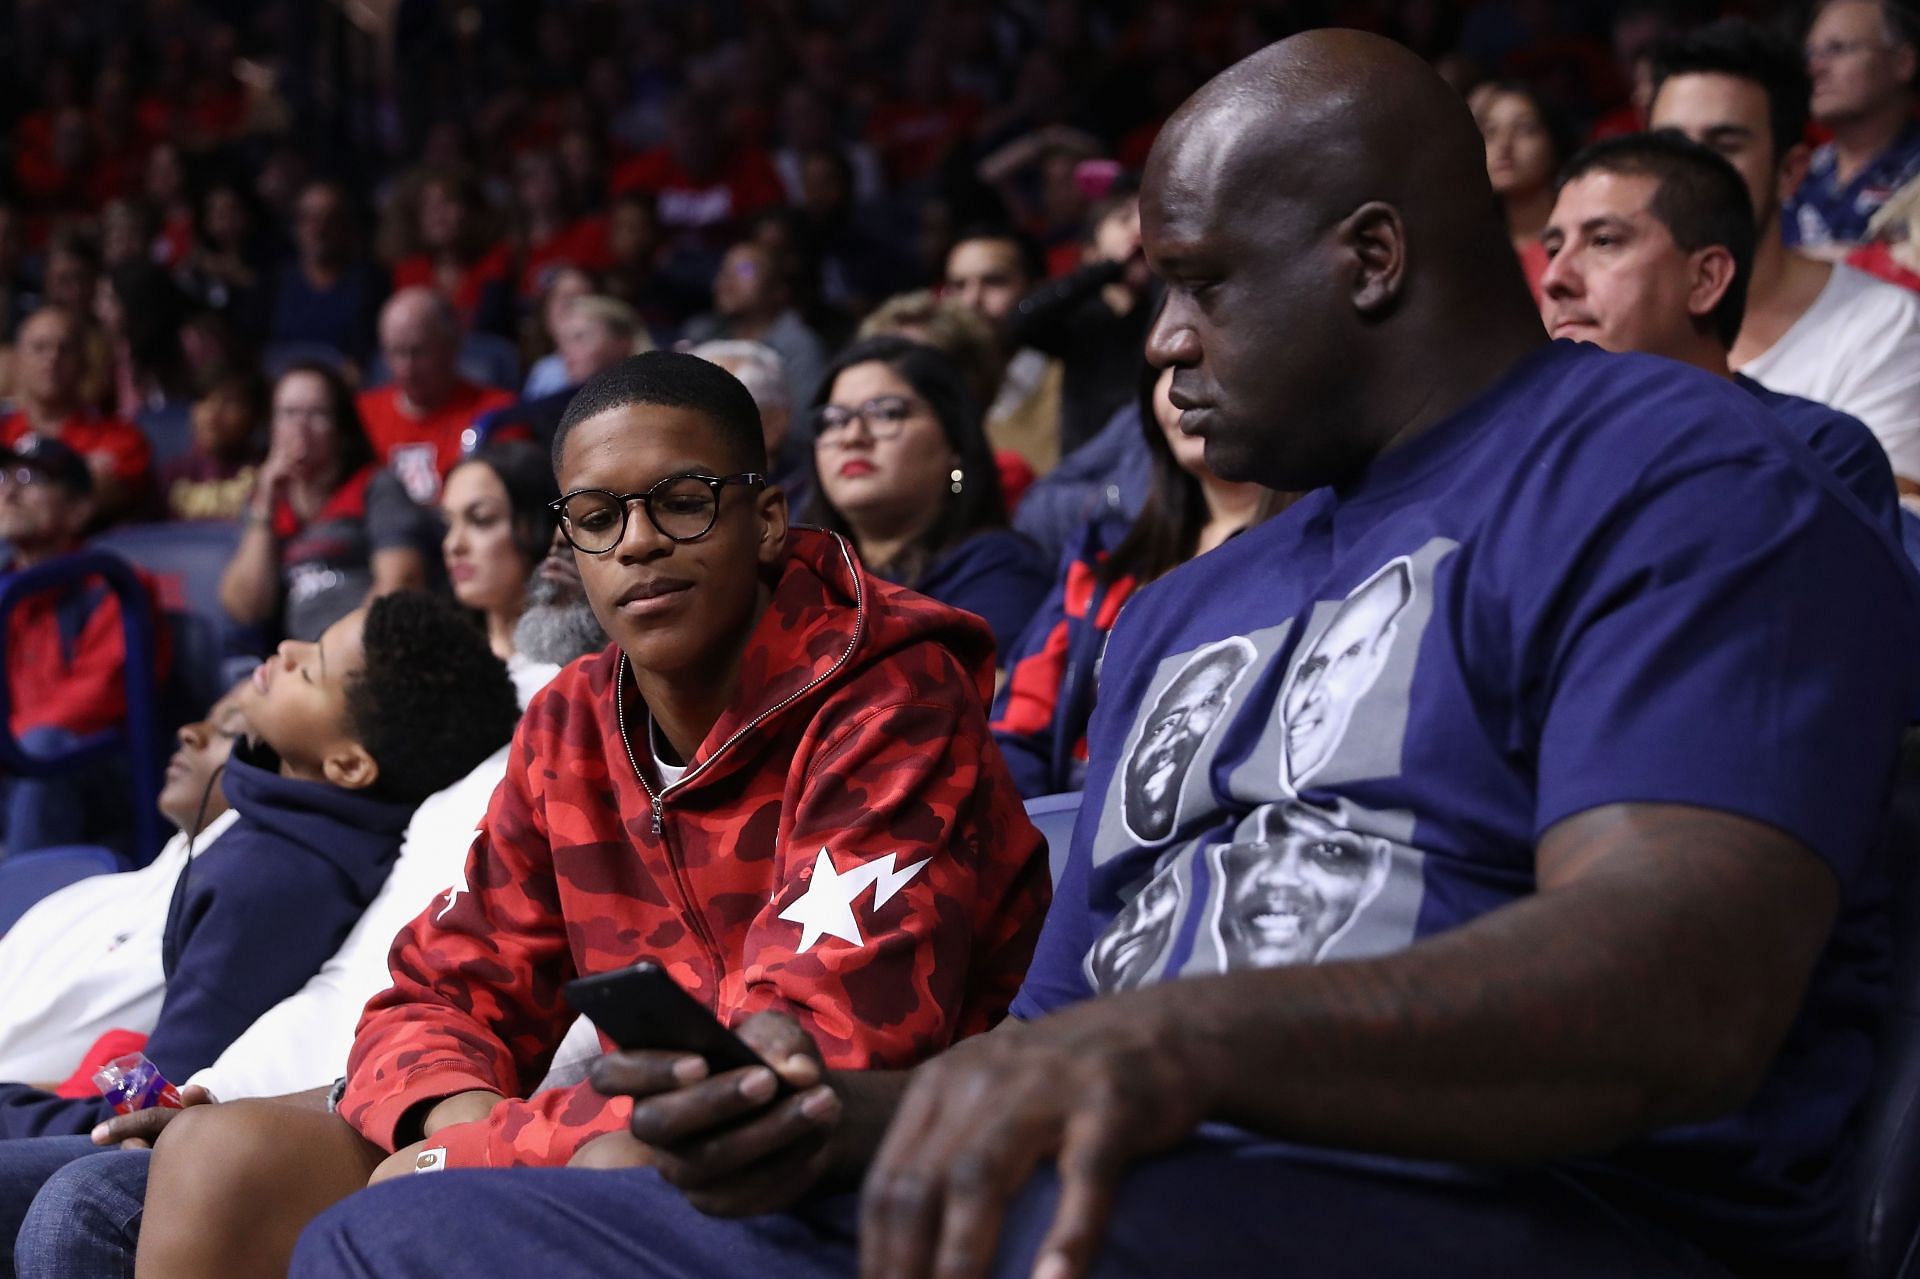 Shareef O'Neal Says His Father Shaq Doesn't Want Him to Enter NBA Draft